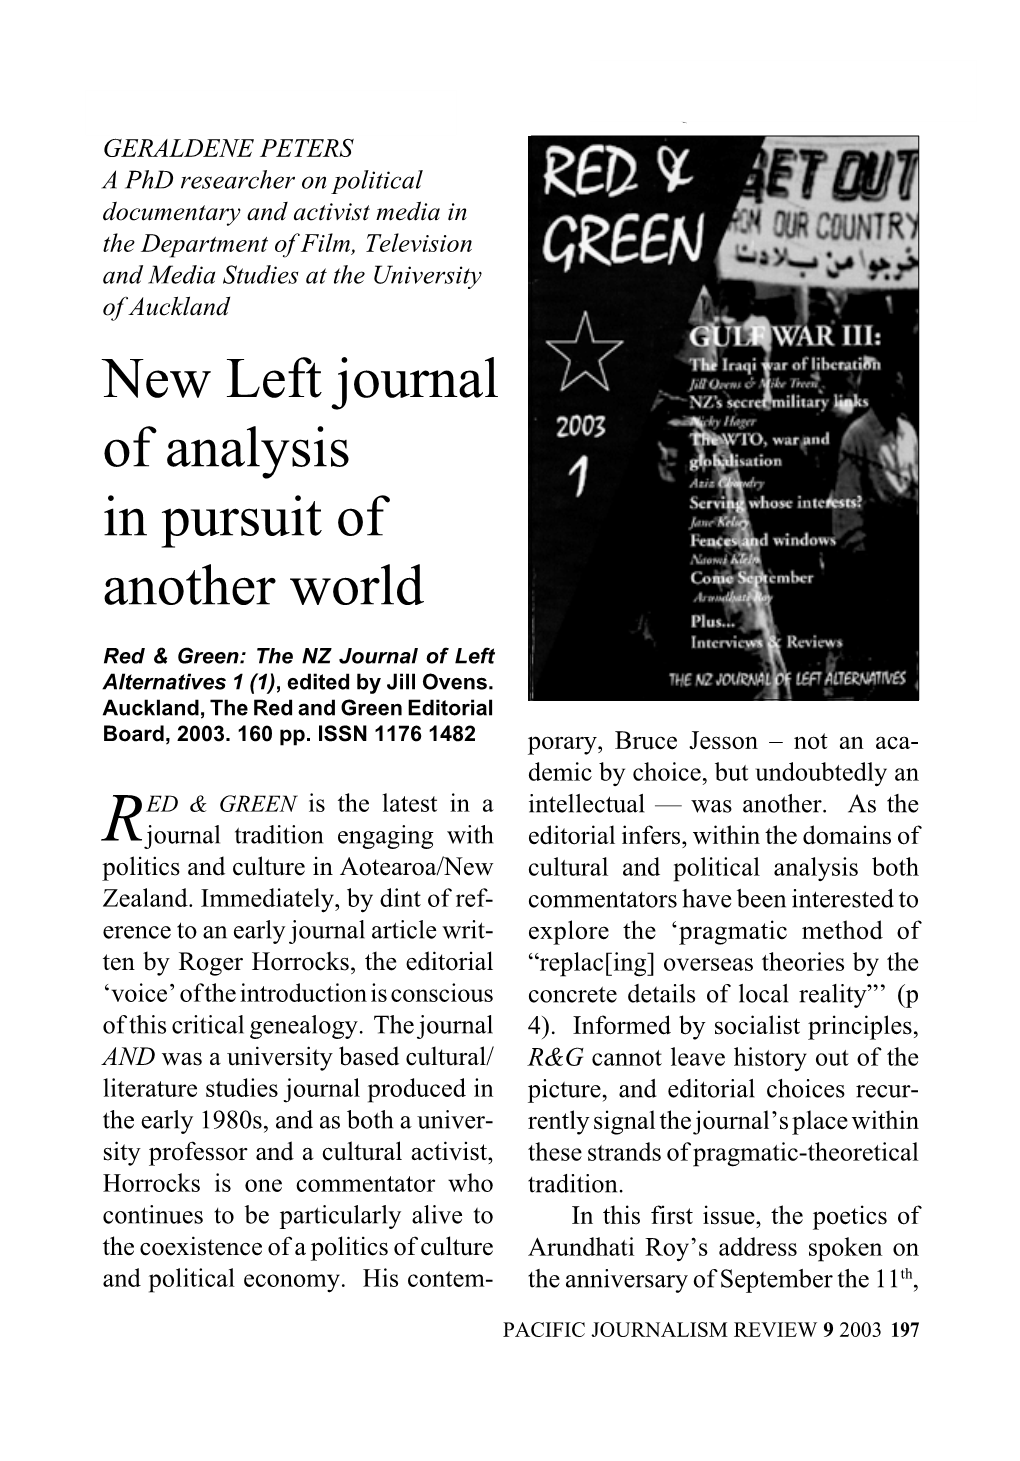 New Left Journal of Analysis in Pursuit of Another World